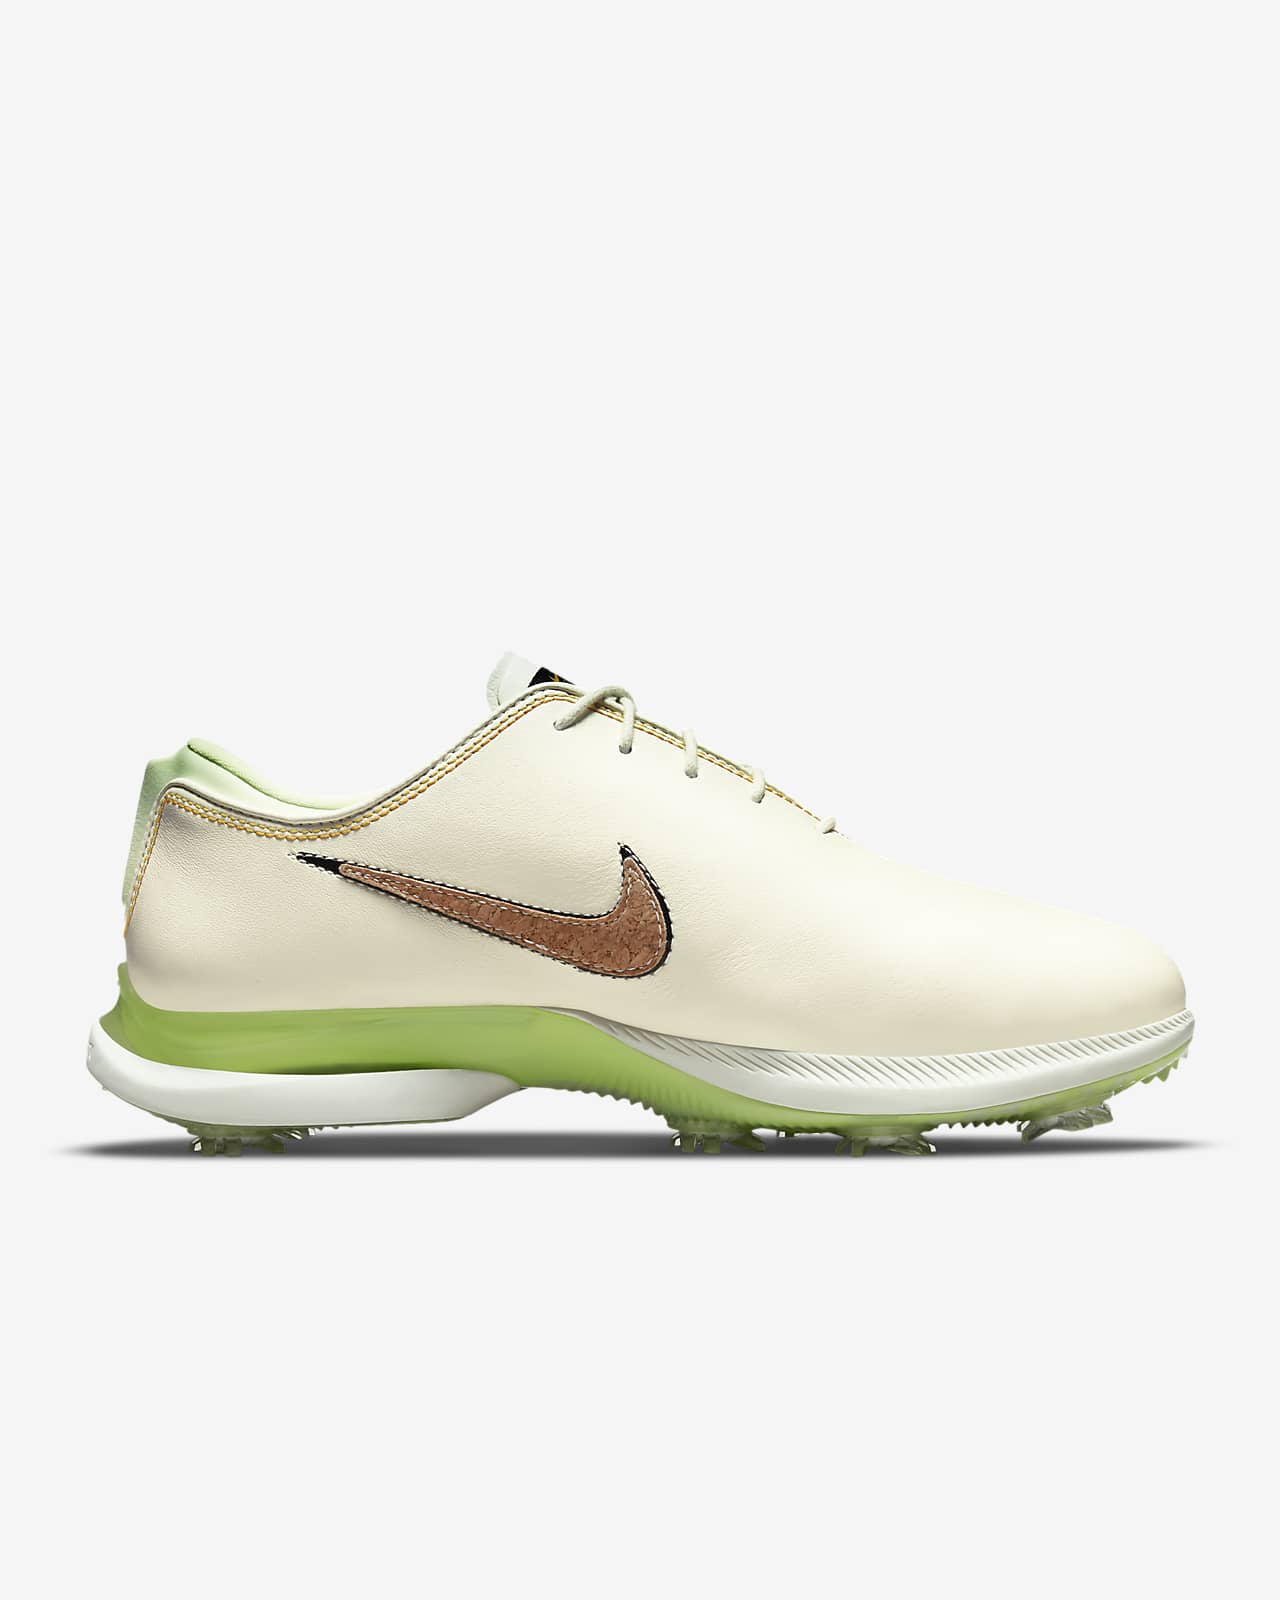 Nike Air Zoom Victory Tour 2 NRG Golf Shoe (Wide)